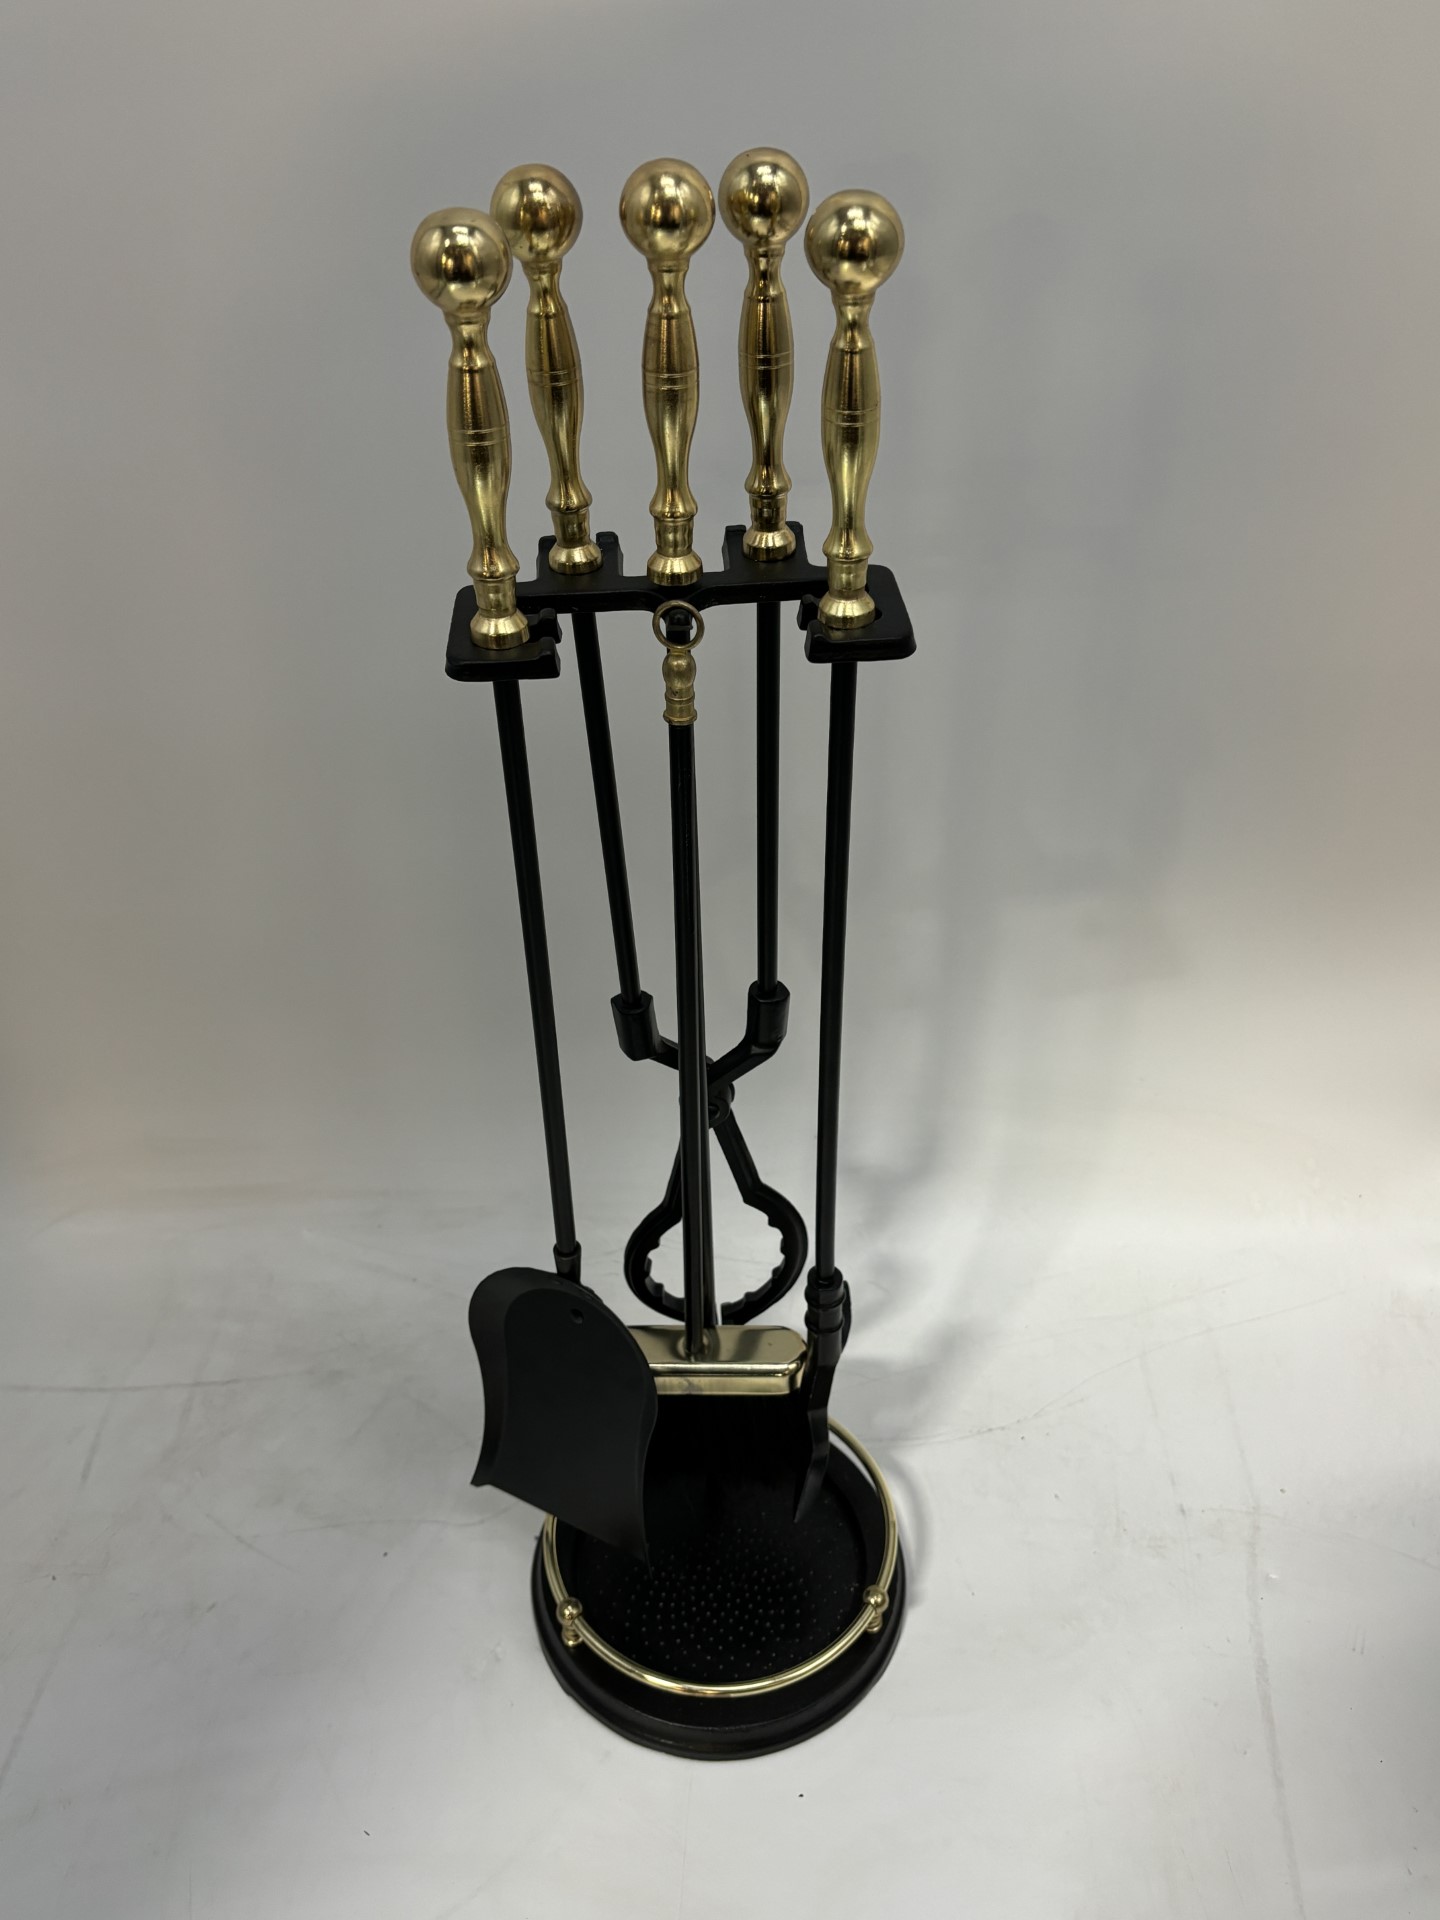 5 piece polished brass /black fireset with rail product image